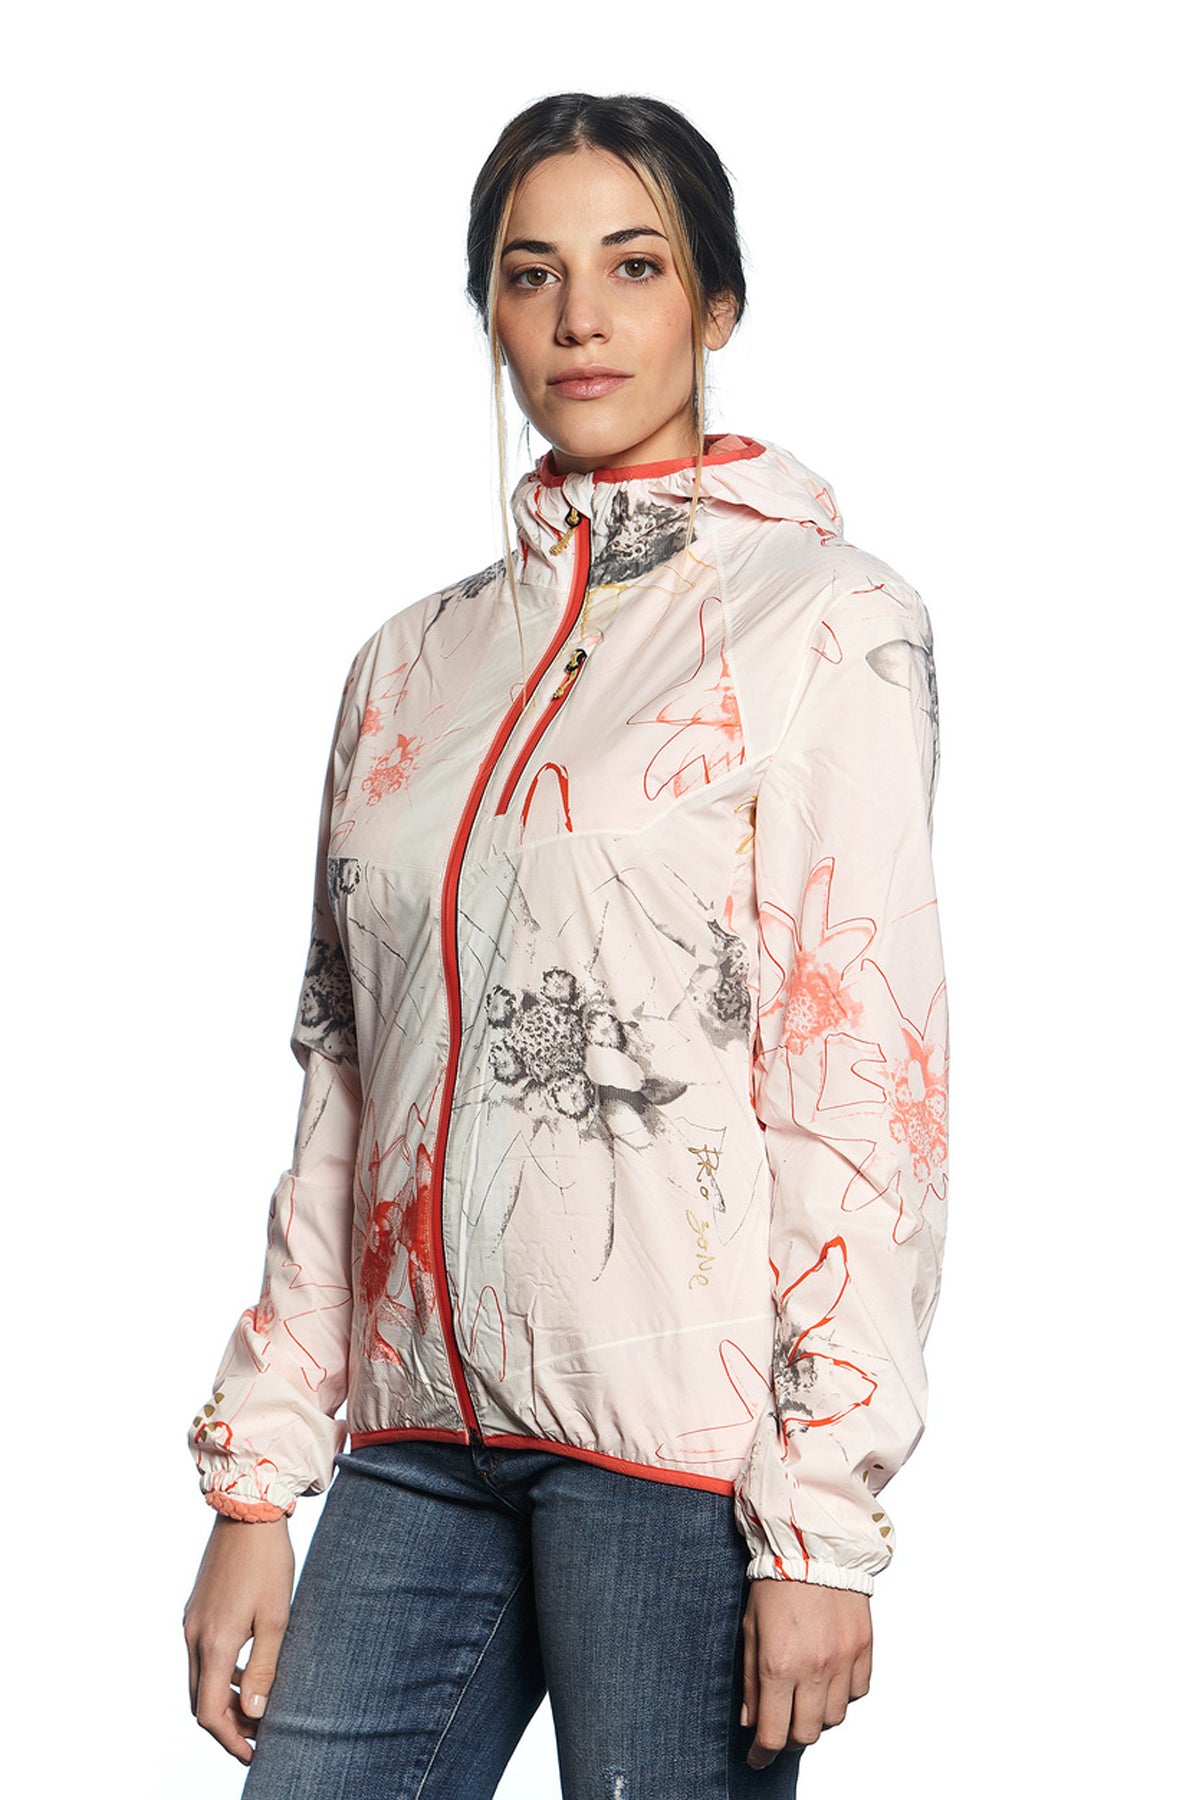 PARKA MUJER NORTHLAND MADISON FUNKTIONS FLOWER 02-0790716